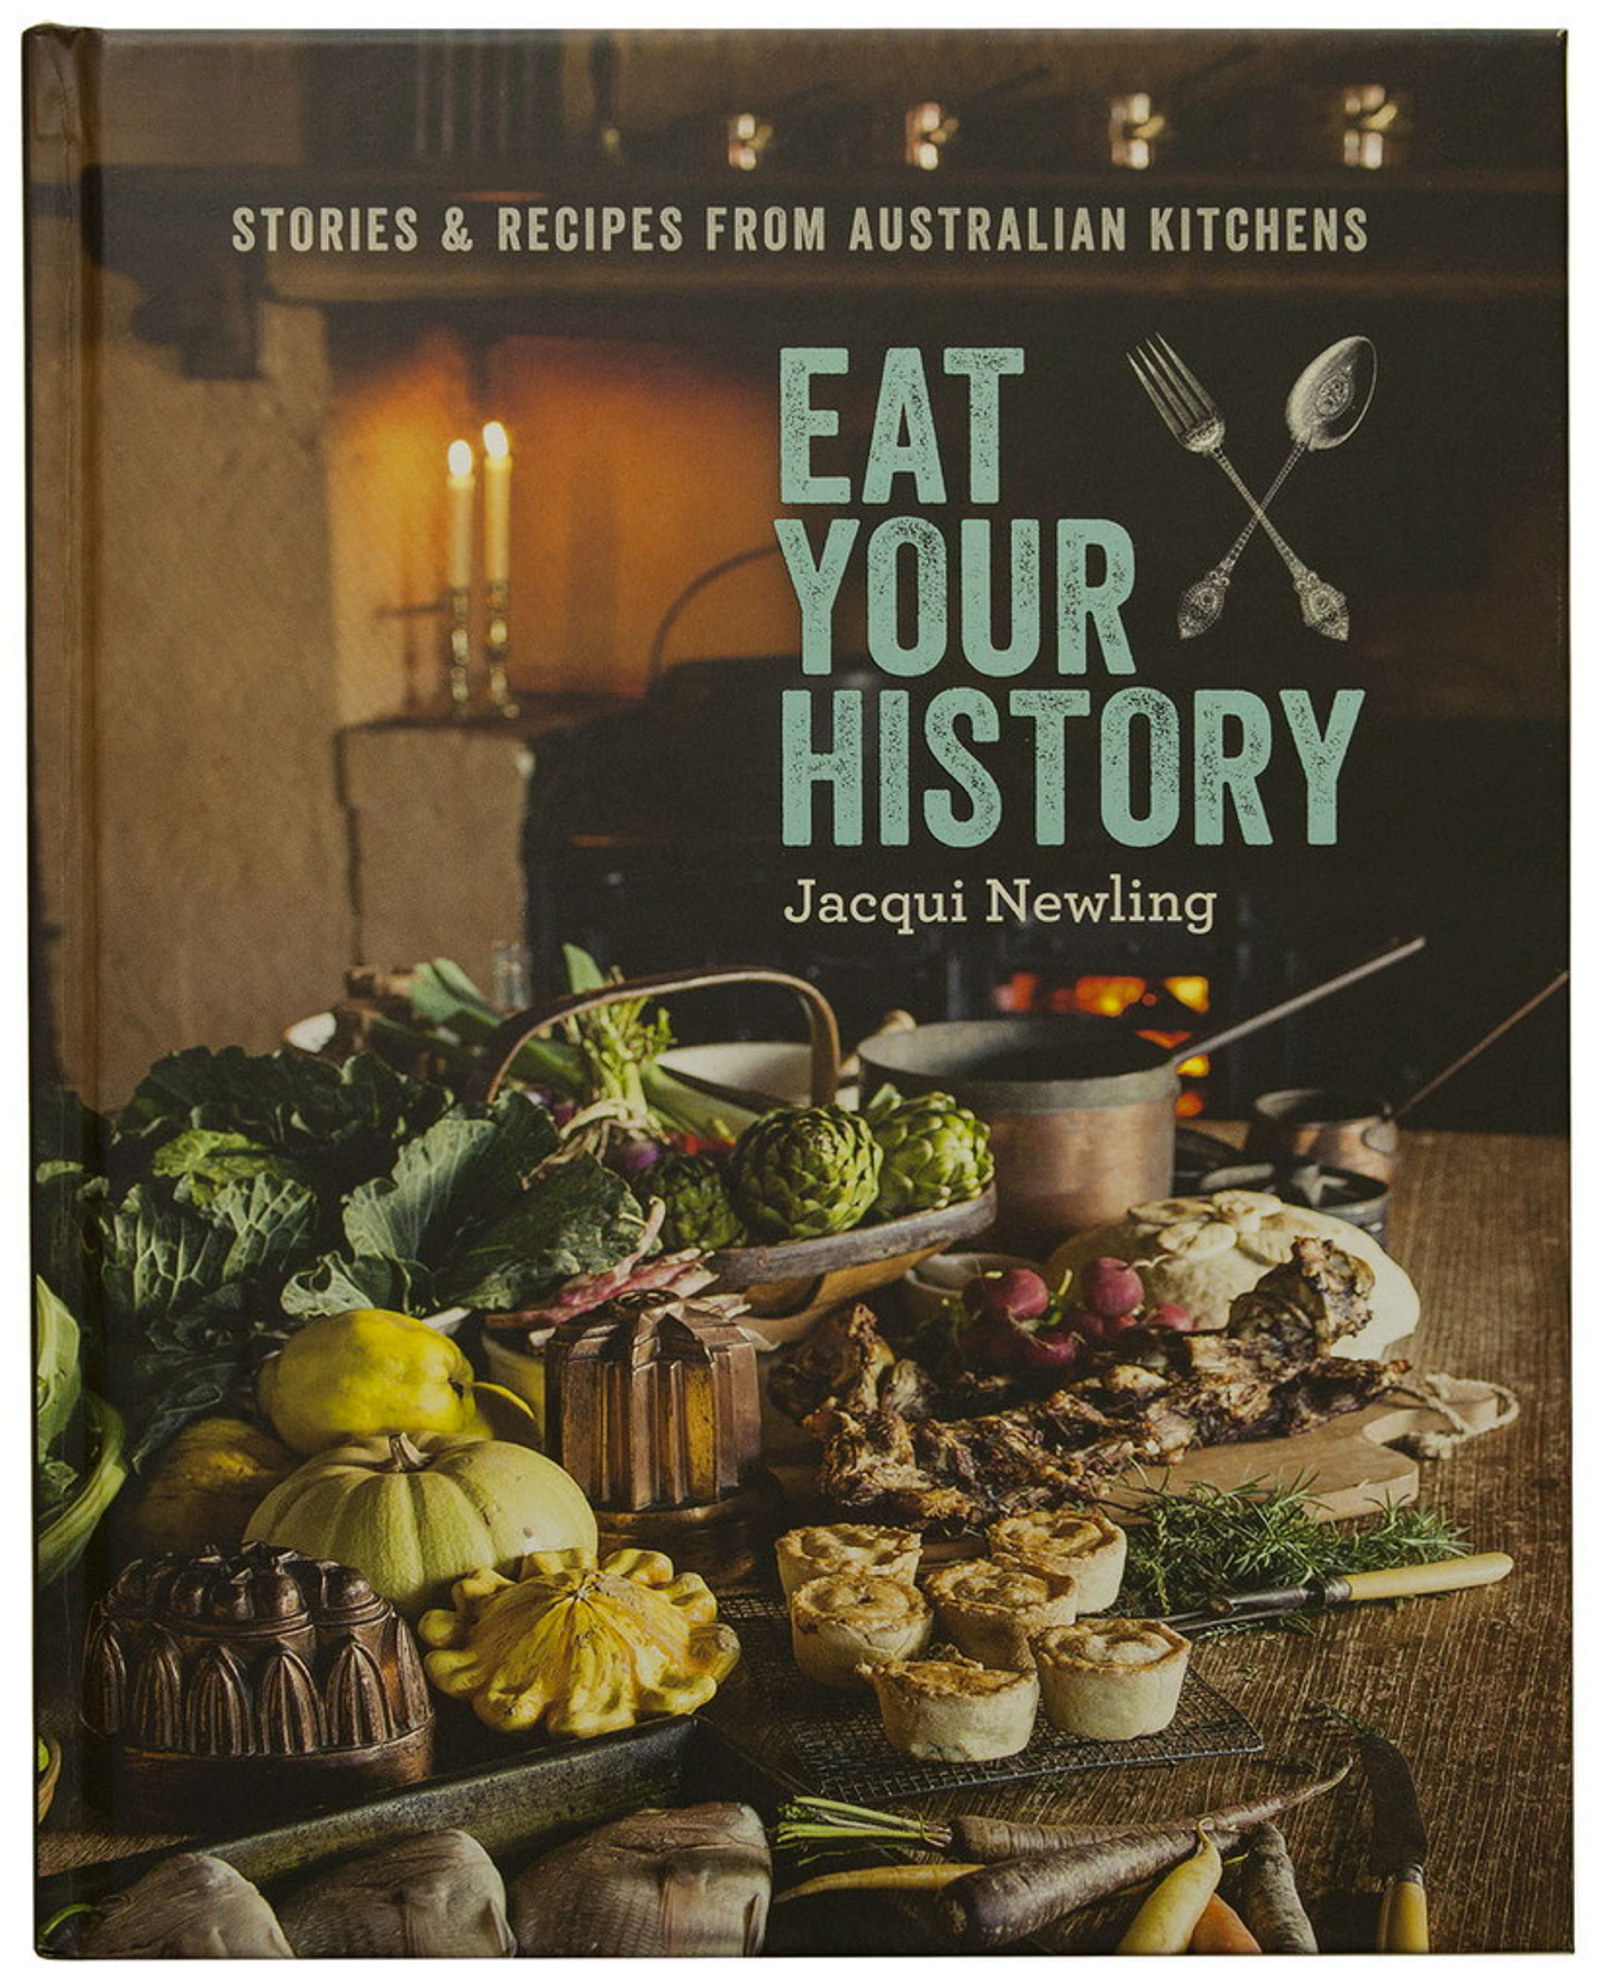 Cover of Eat your history cook book. Picture of food on a table with fire in the background.